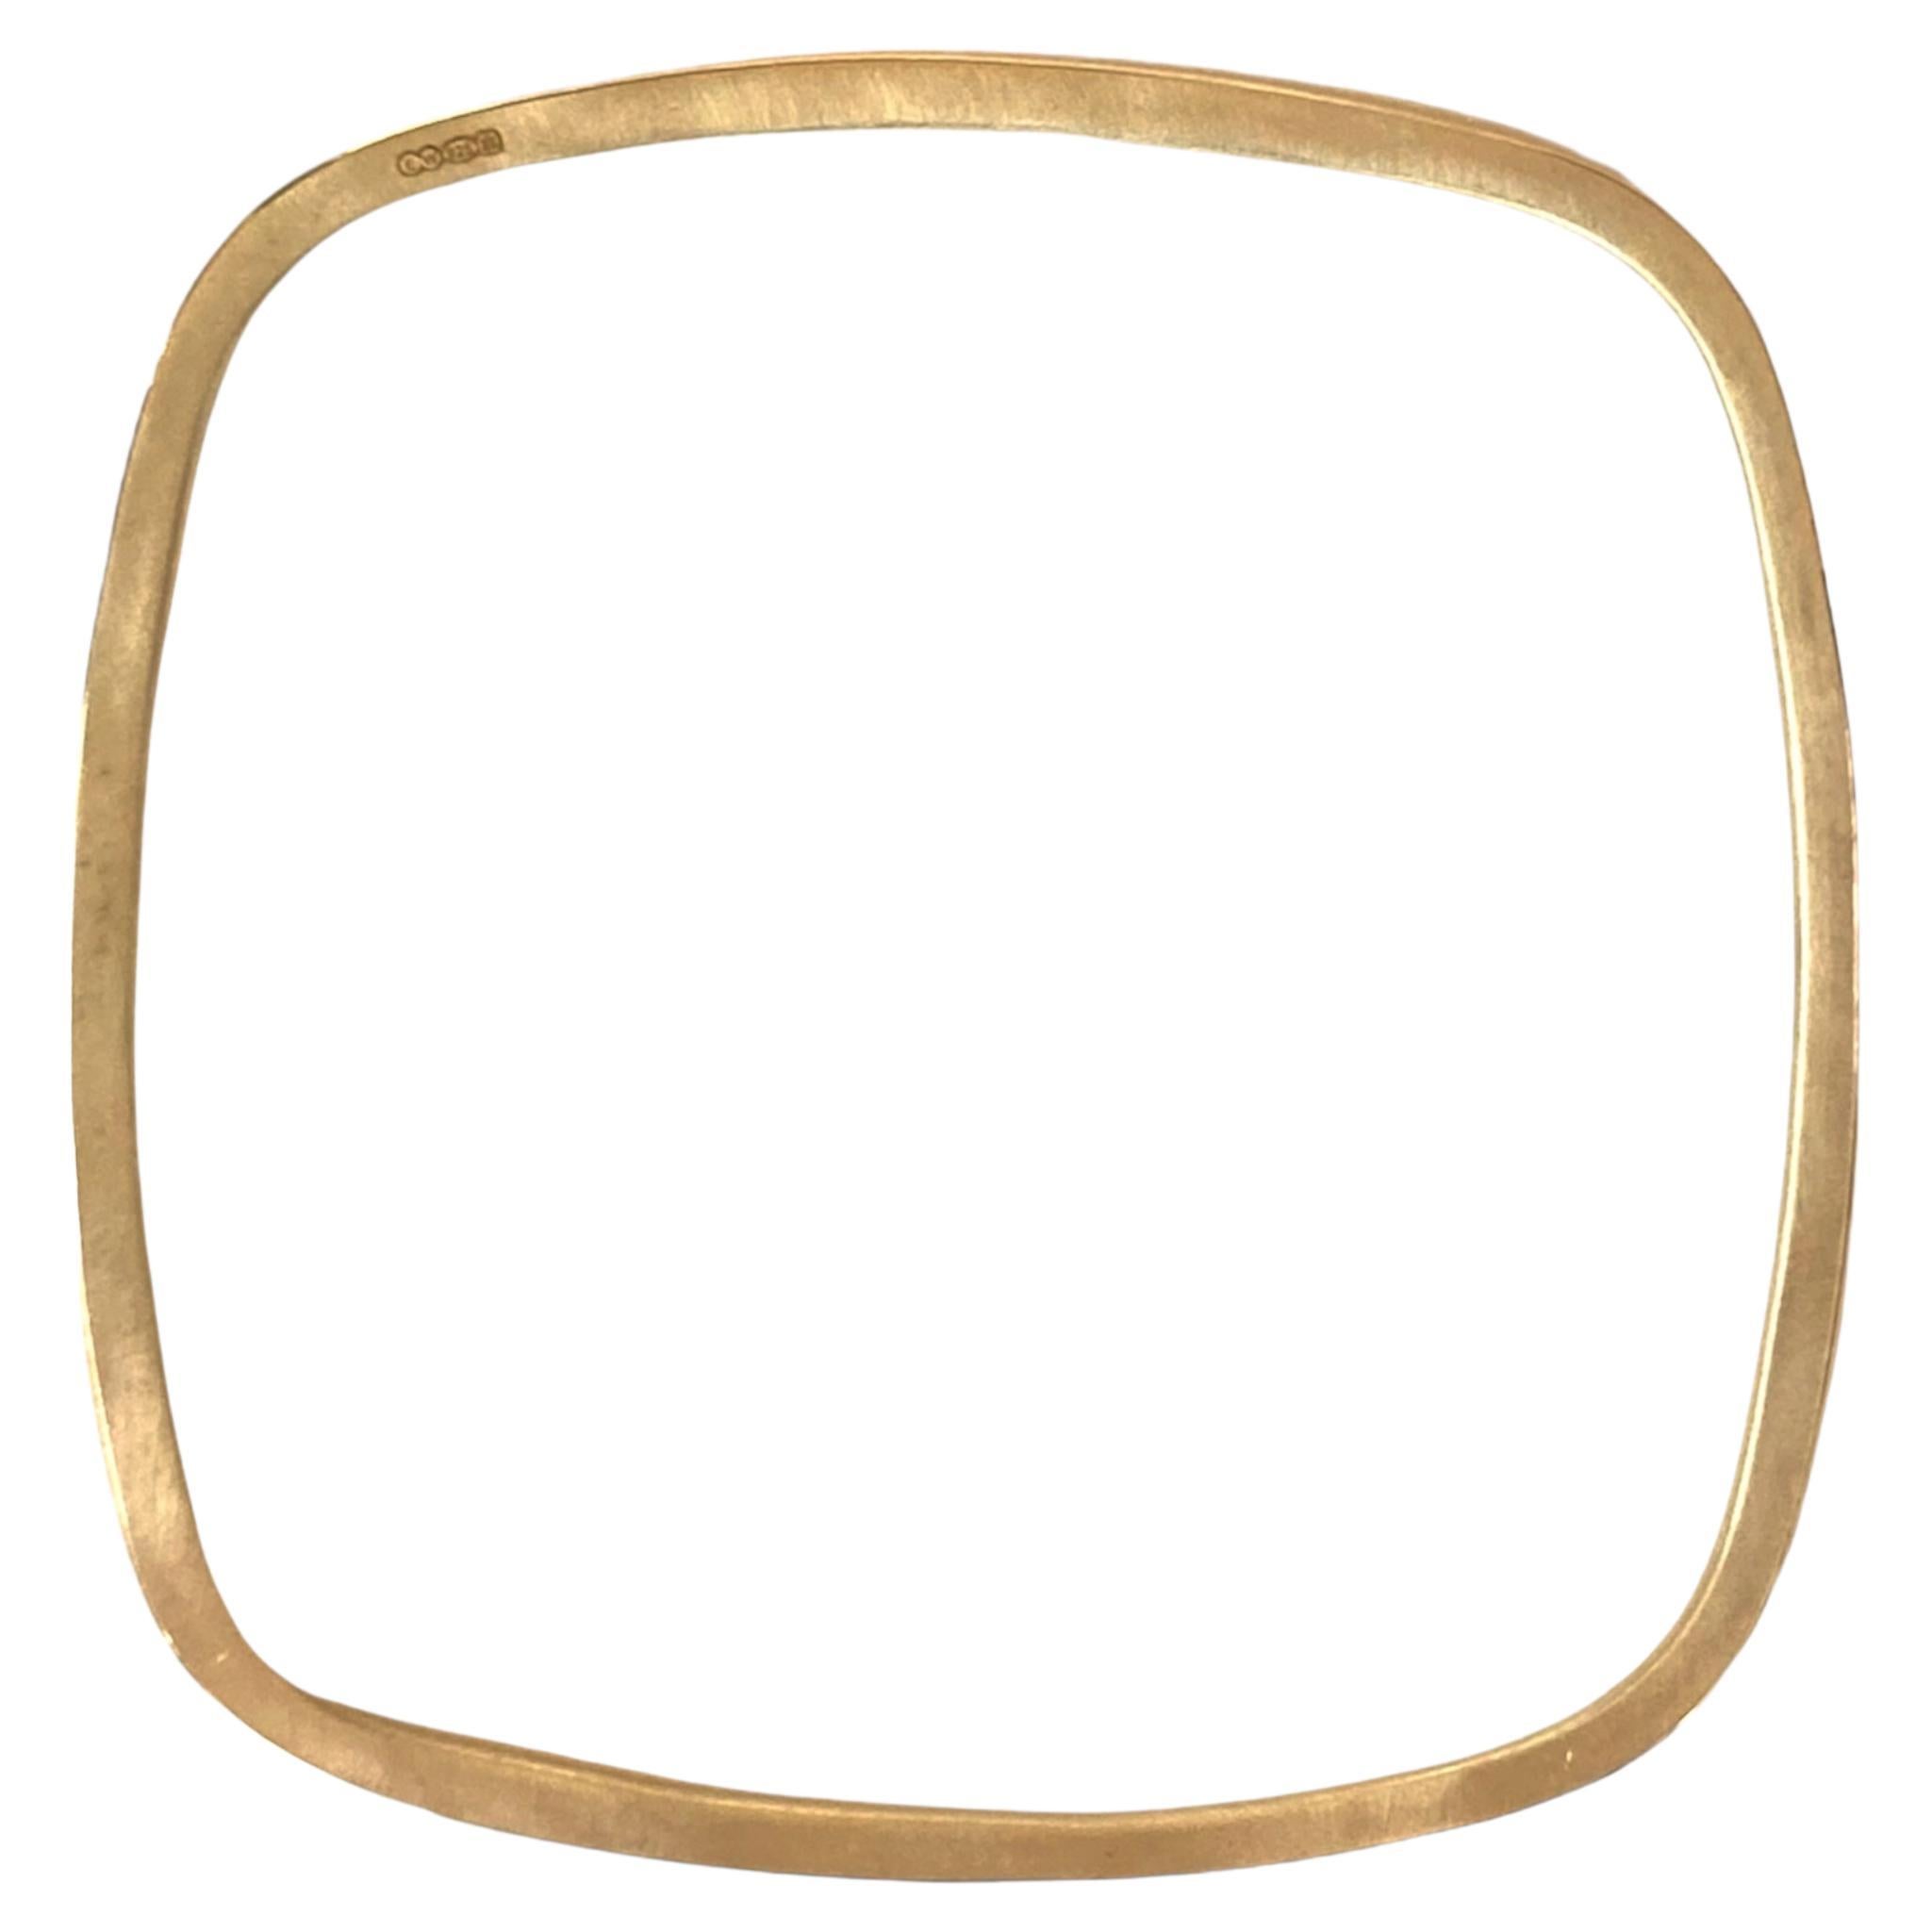 Gold Vermeil Hand Forged Square Box Bangle, Size Large